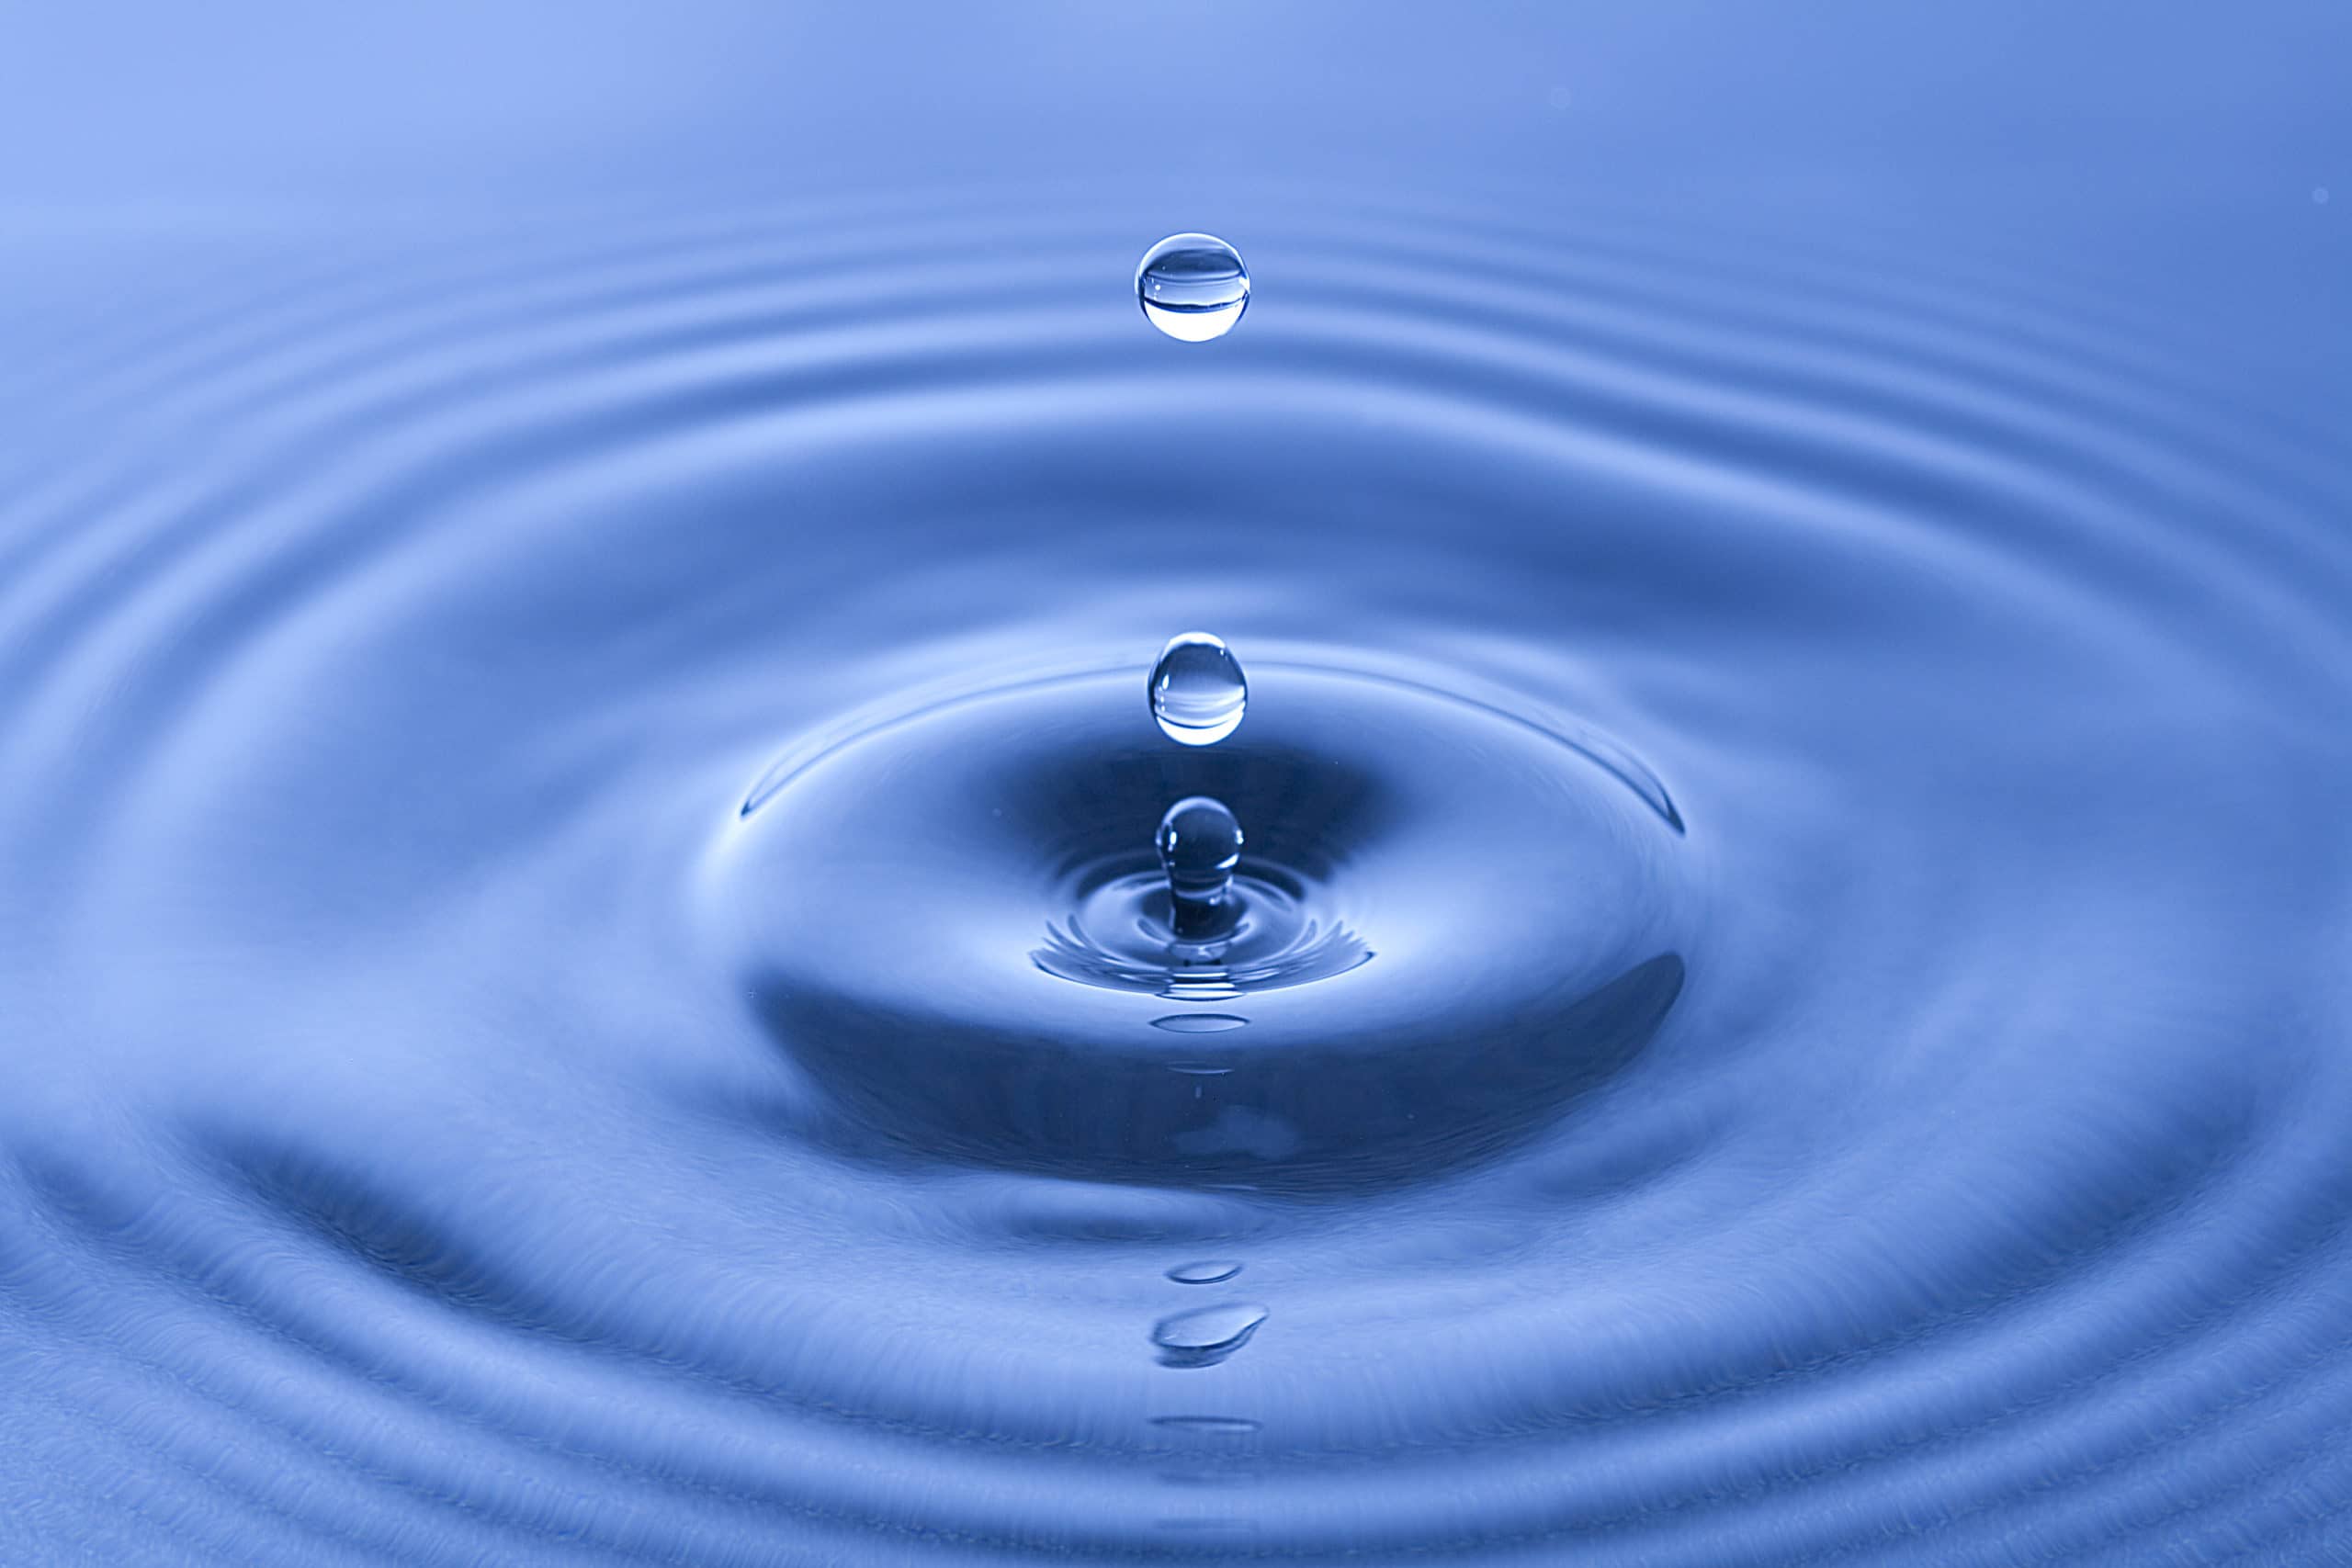 water ripples; there is estrogen in water we drink